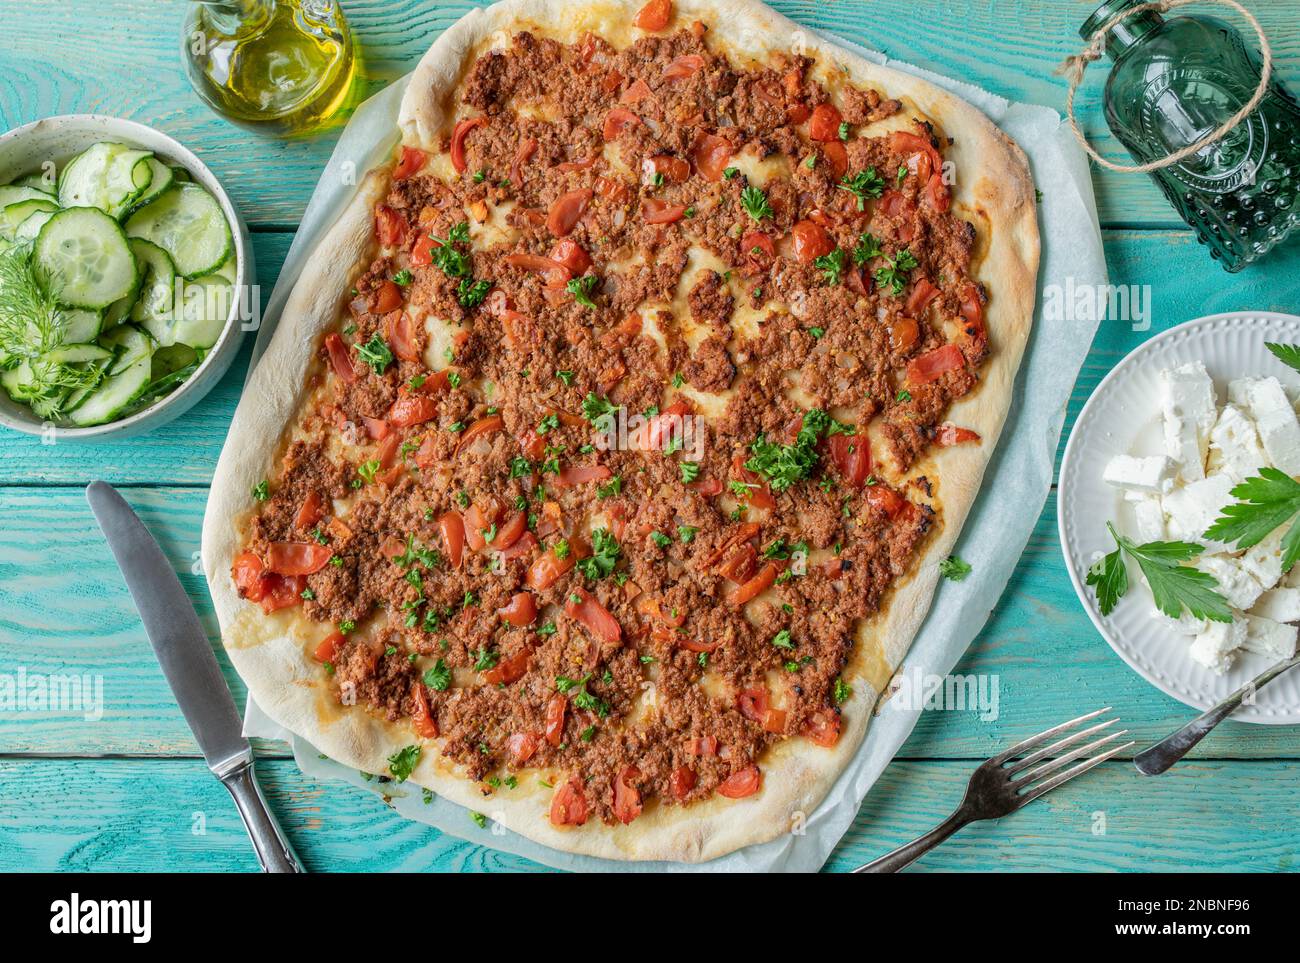 Turkish pizza or lahmacun with ground beef, vegetables. Served with feta cheese and cucumber salad on turquoise background. Flat lay Stock Photo